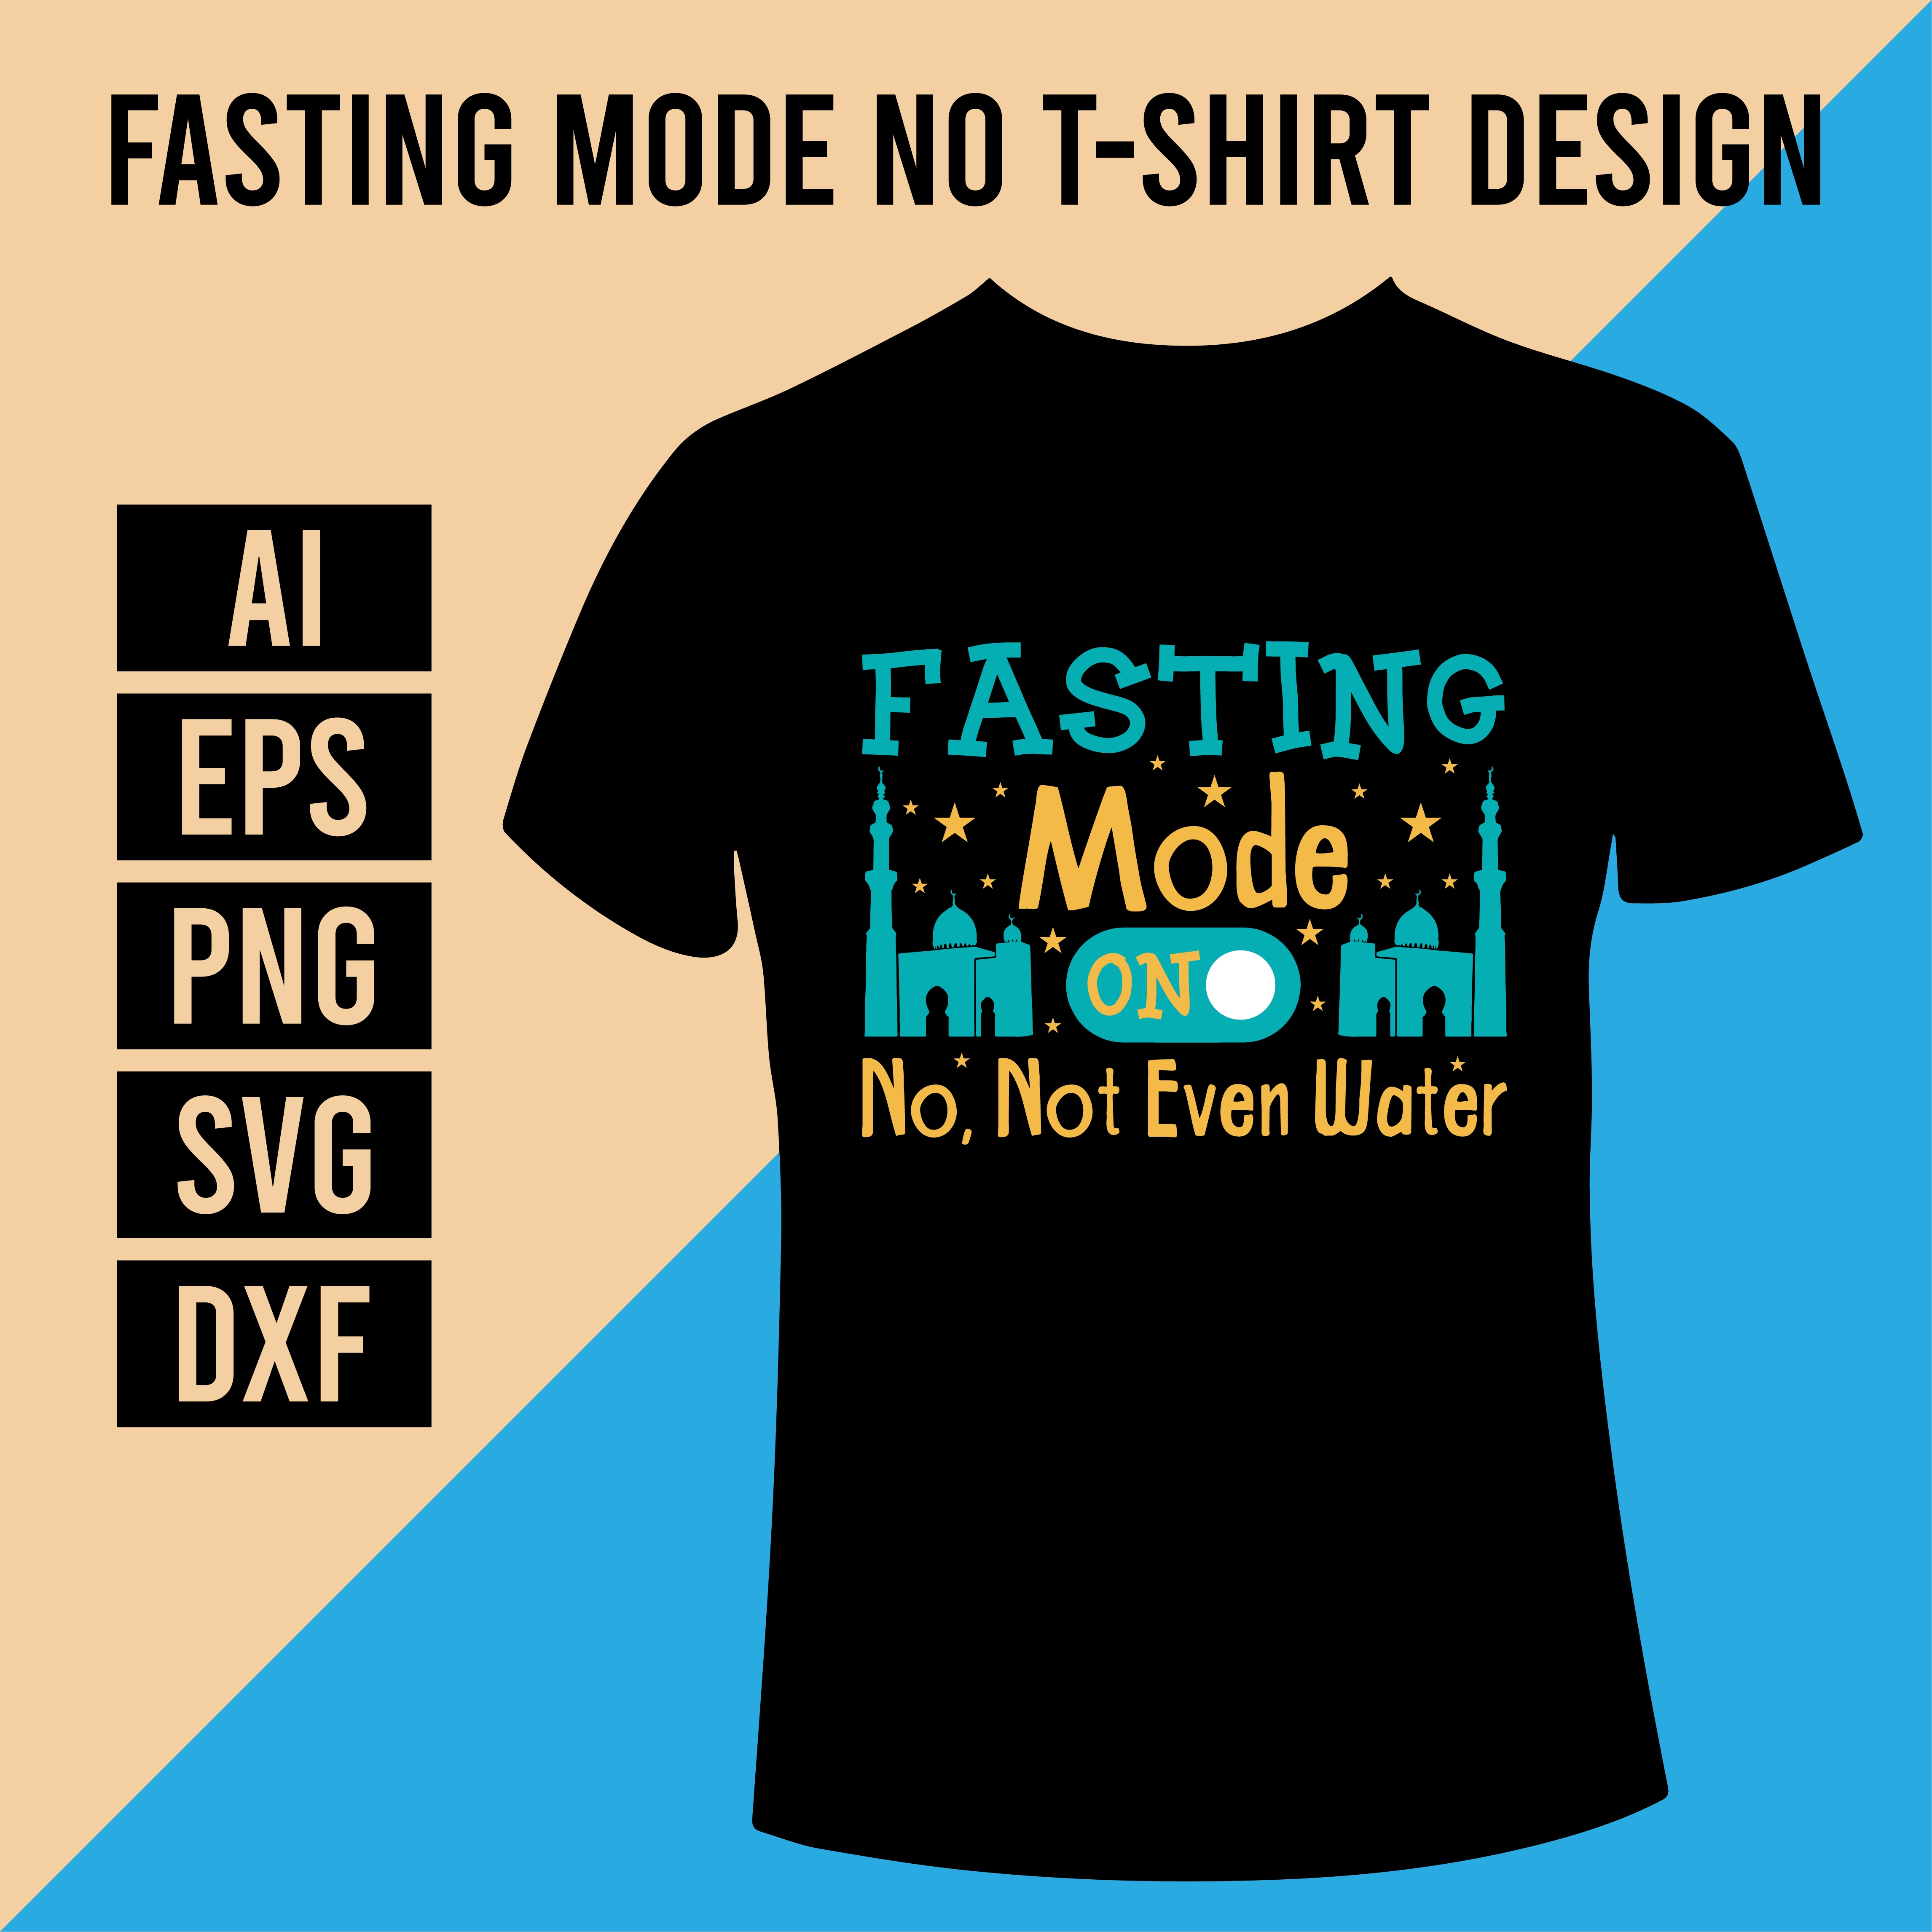 Fasting Mode On T-Shirt Design cover image.